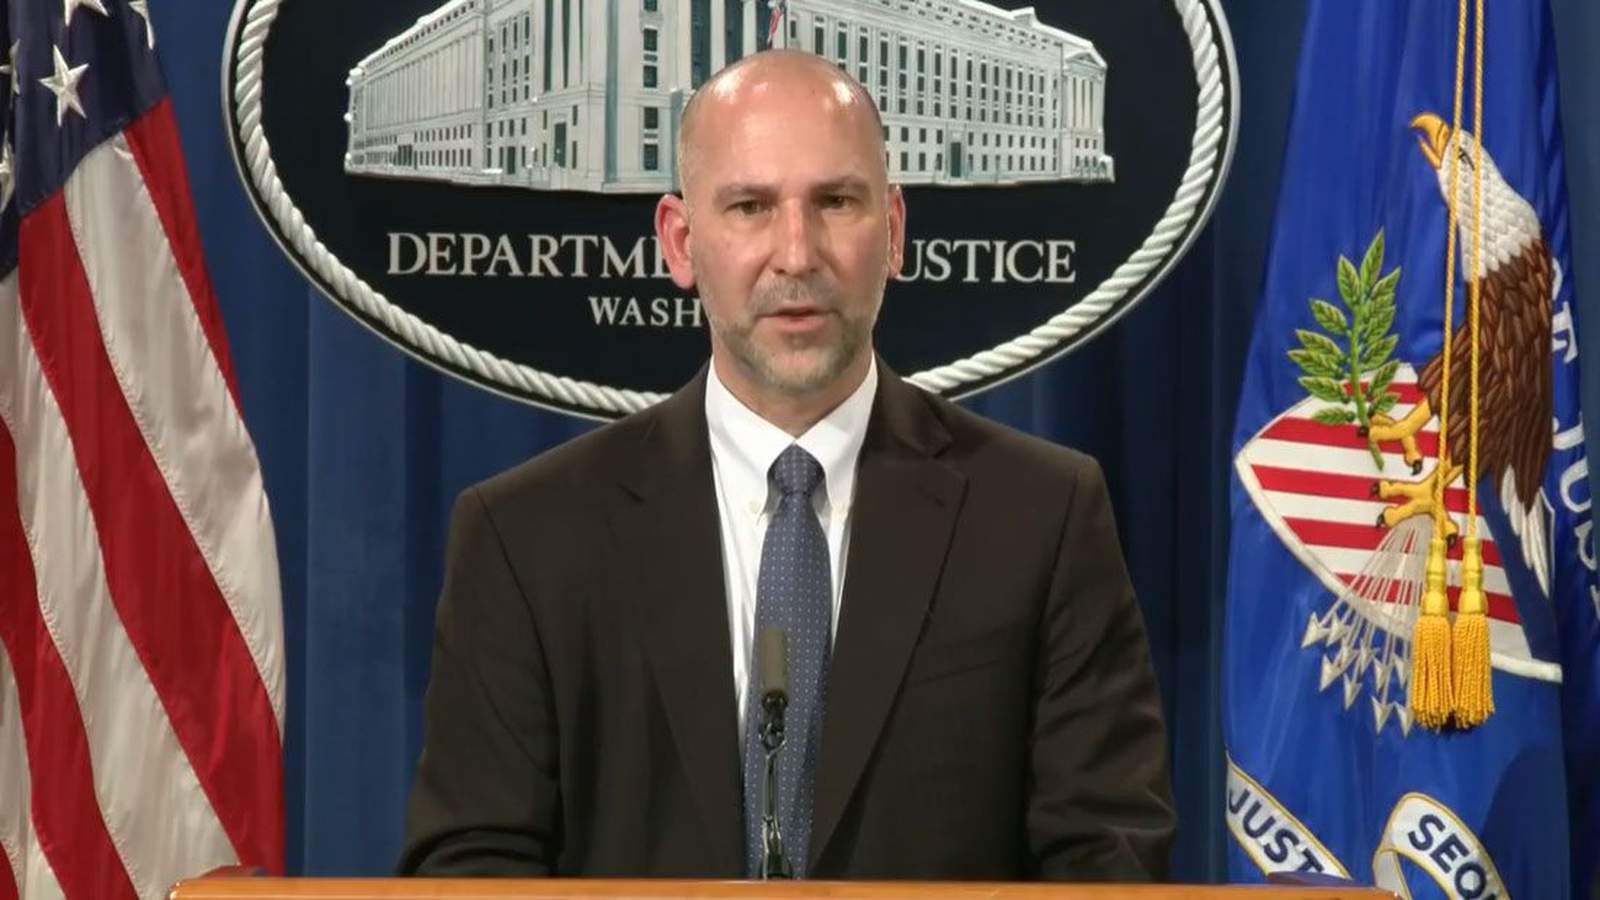 WATCH: DOJ gives update on charges related to Capitol chaos